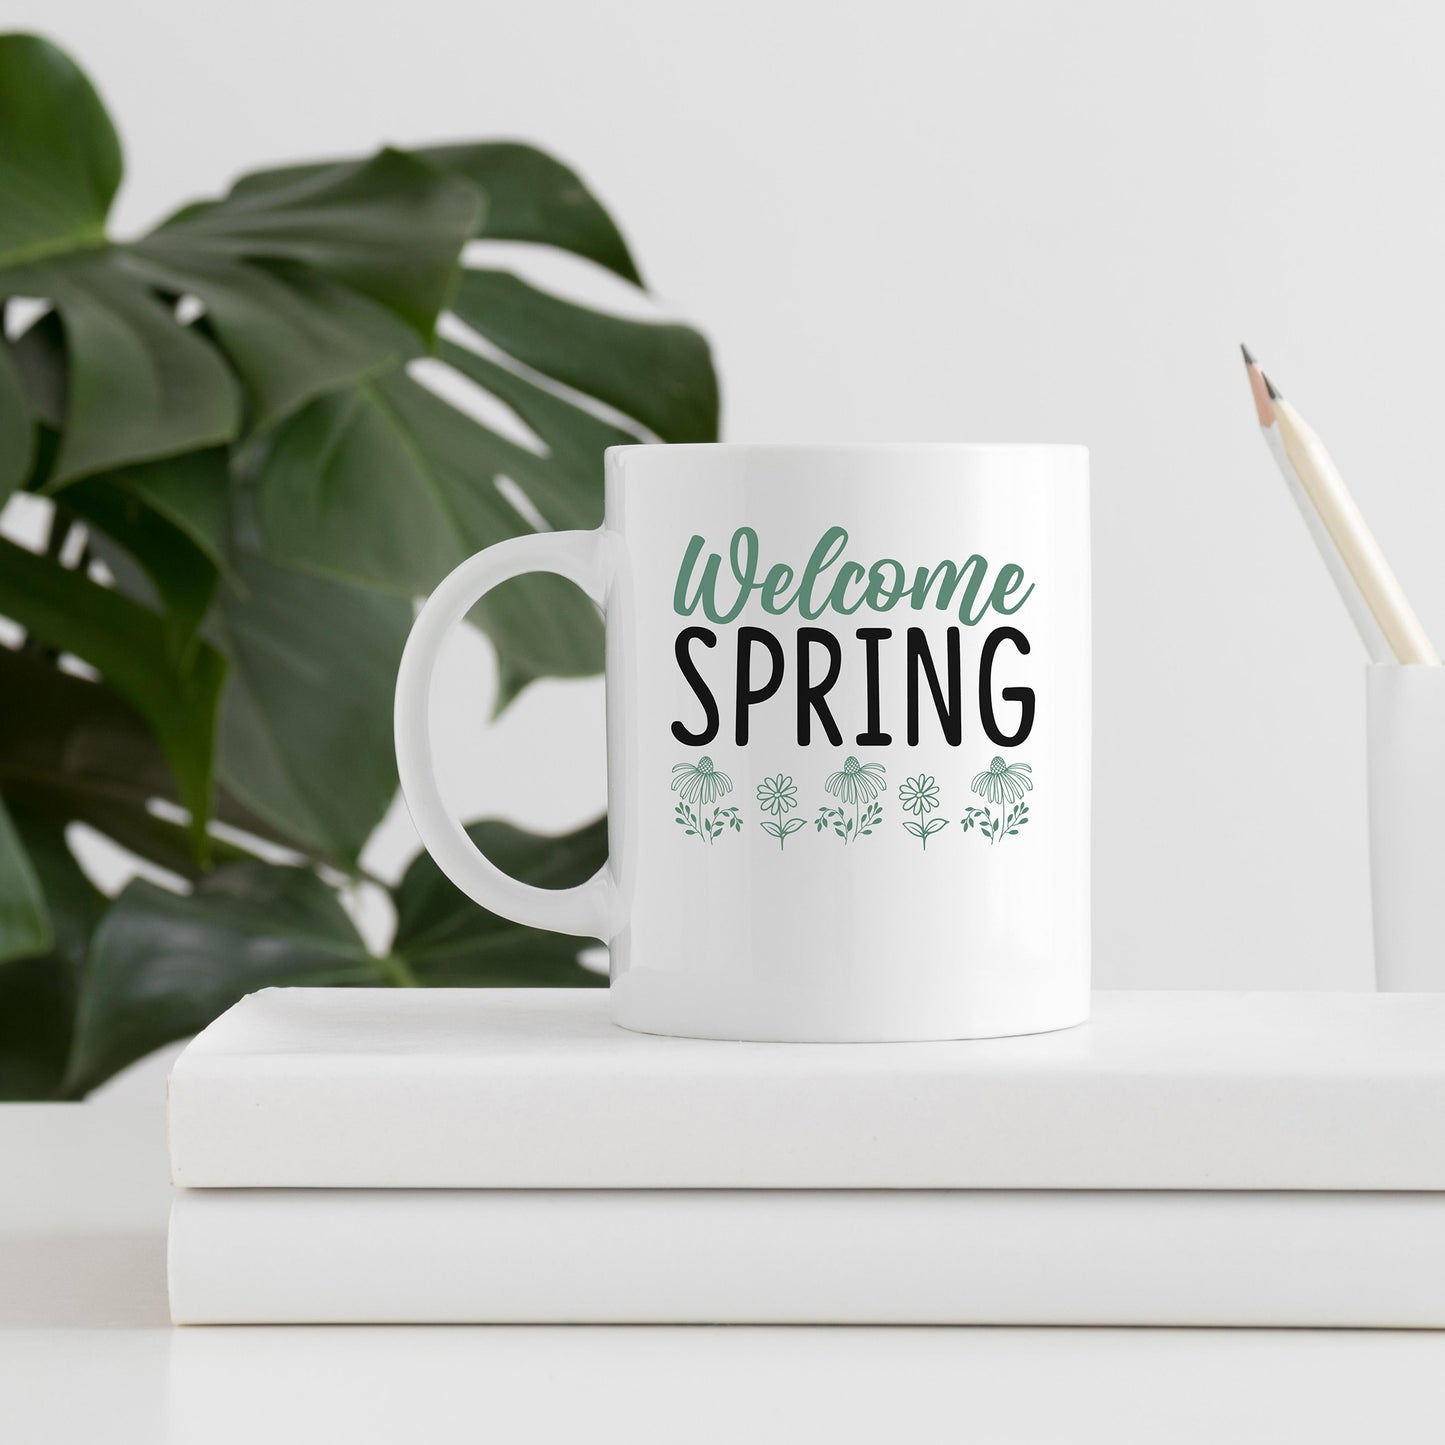 "Welcome Spring" Graphic